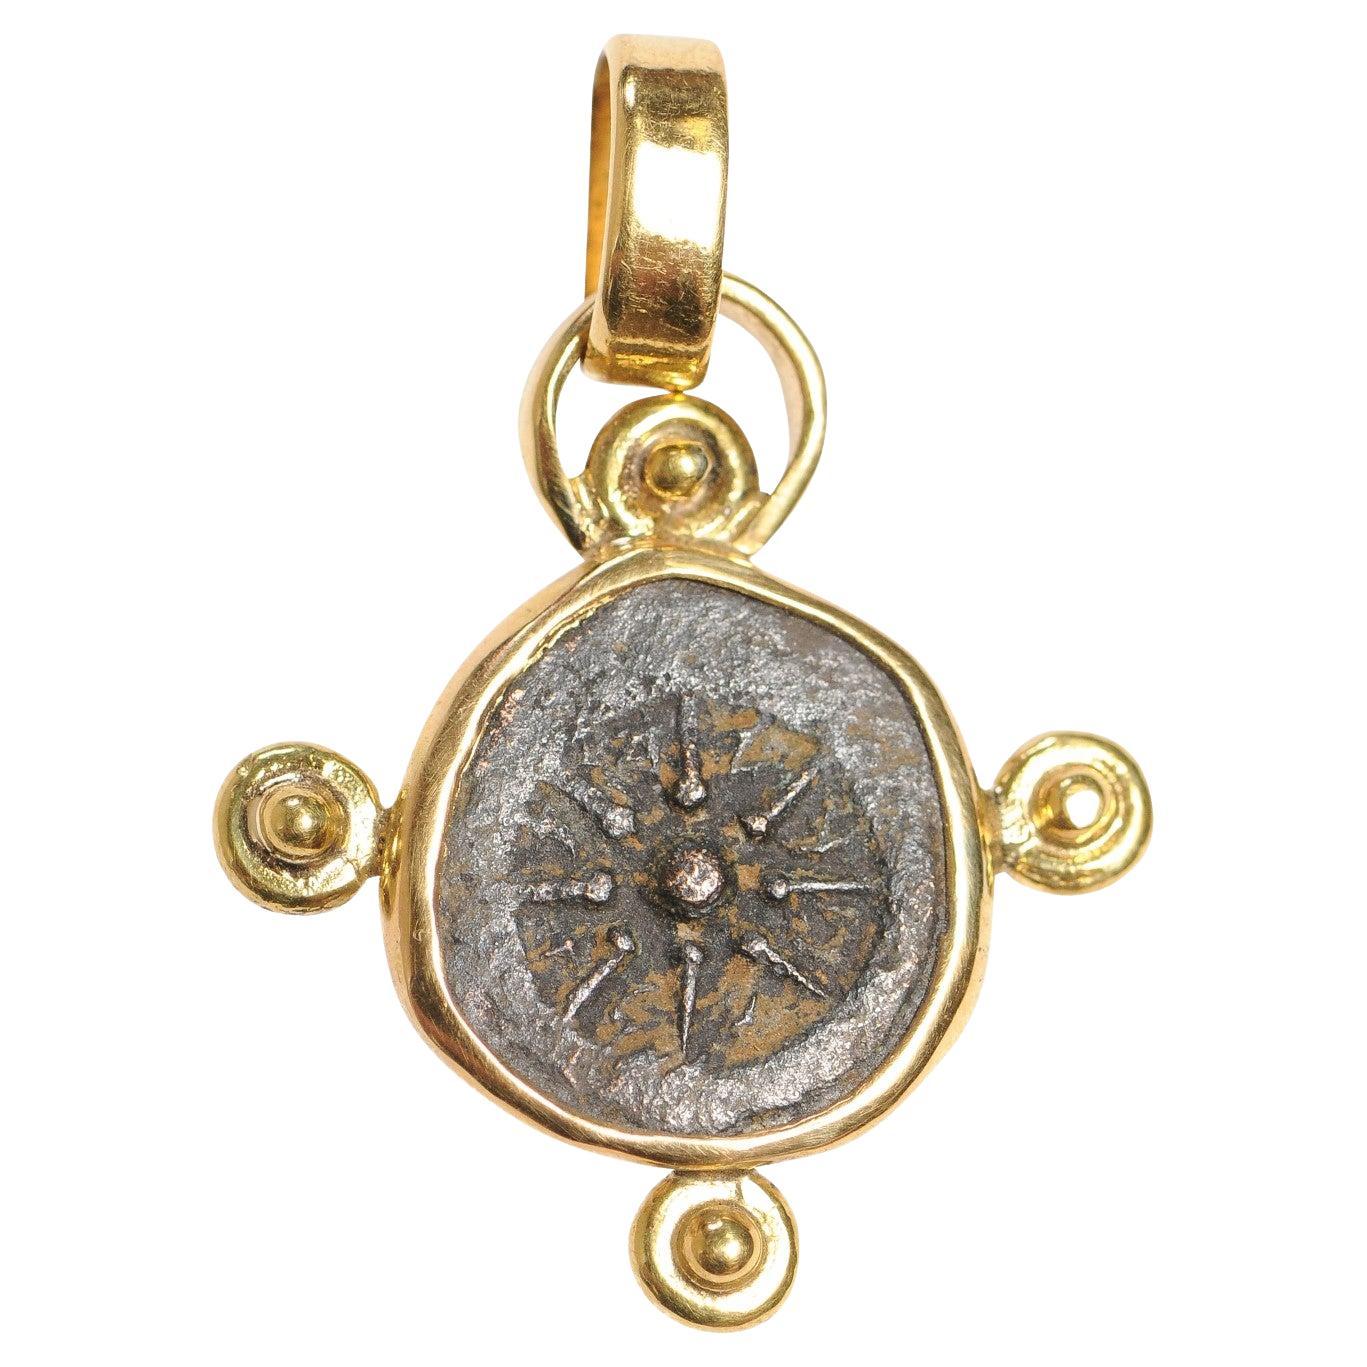 Roman Widow's Mite Coin, 22kt Gold Pendant (pendant only)